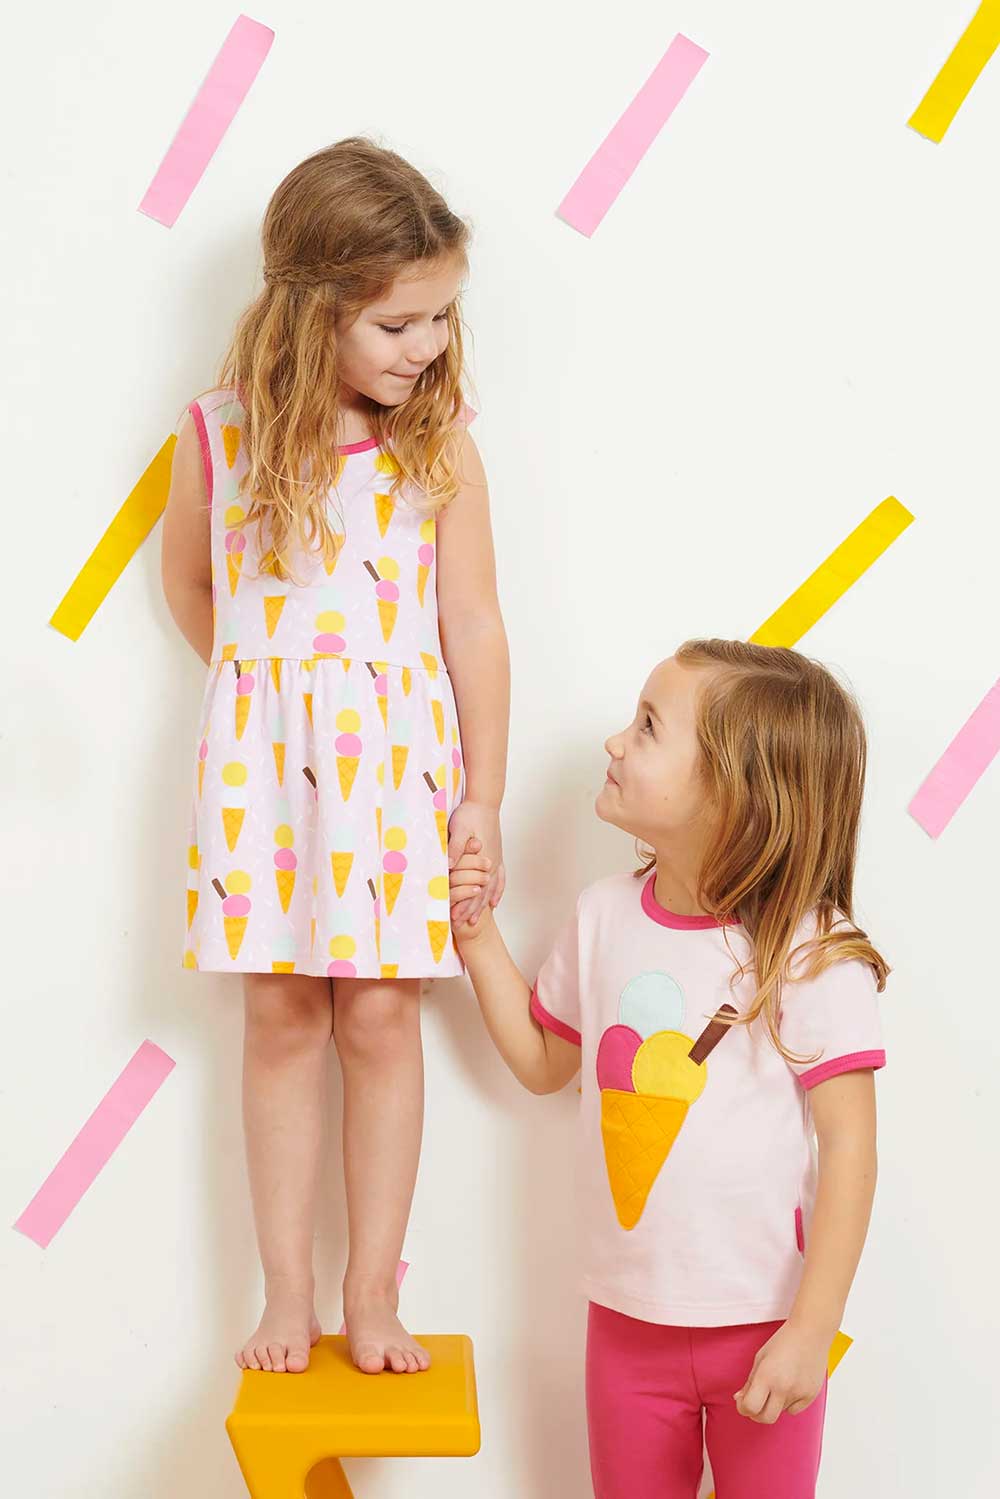 UK based children's brand Toby Tiger has been offering organic, sustainable kids clothes since 1998!